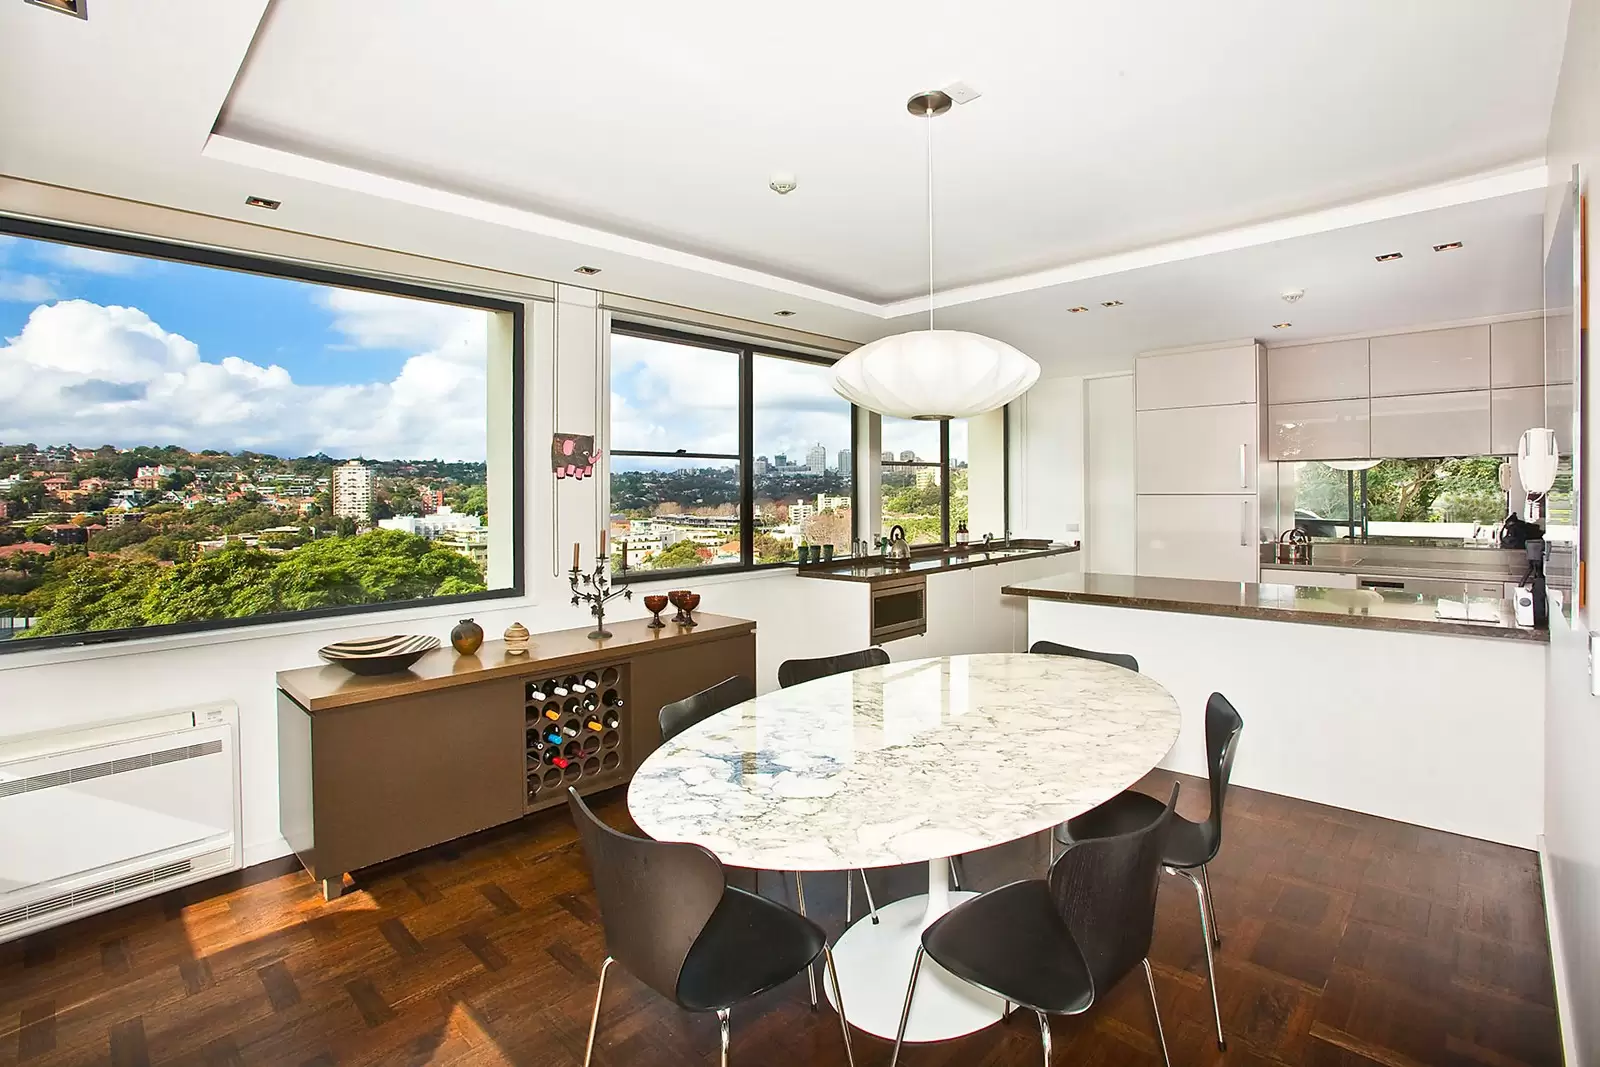 Photo #5: 2/4 Marathon Road, Darling Point - Sold by Sydney Sotheby's International Realty